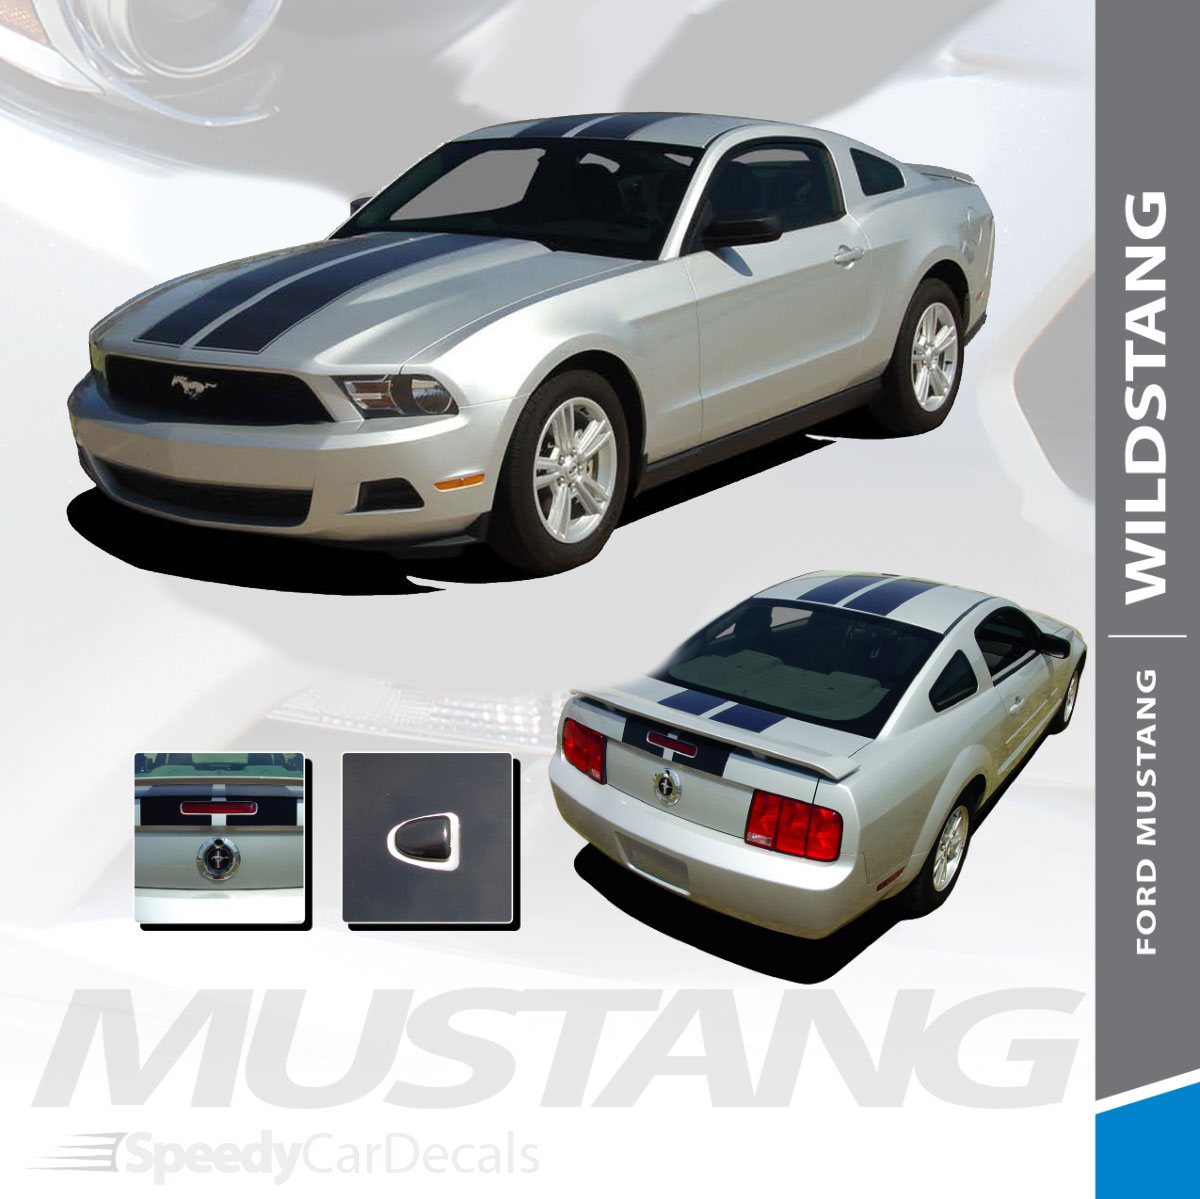 WILDSTANG 10 : 2010-2012 Ford Mustang Hood Roof Trunk Racing Stripes Rally  Vinyl Graphic Kit - SpeedyCarDecals - Fast Car Decals, Auto Decals, Auto  Stripes, Vehicle Specific Graphics